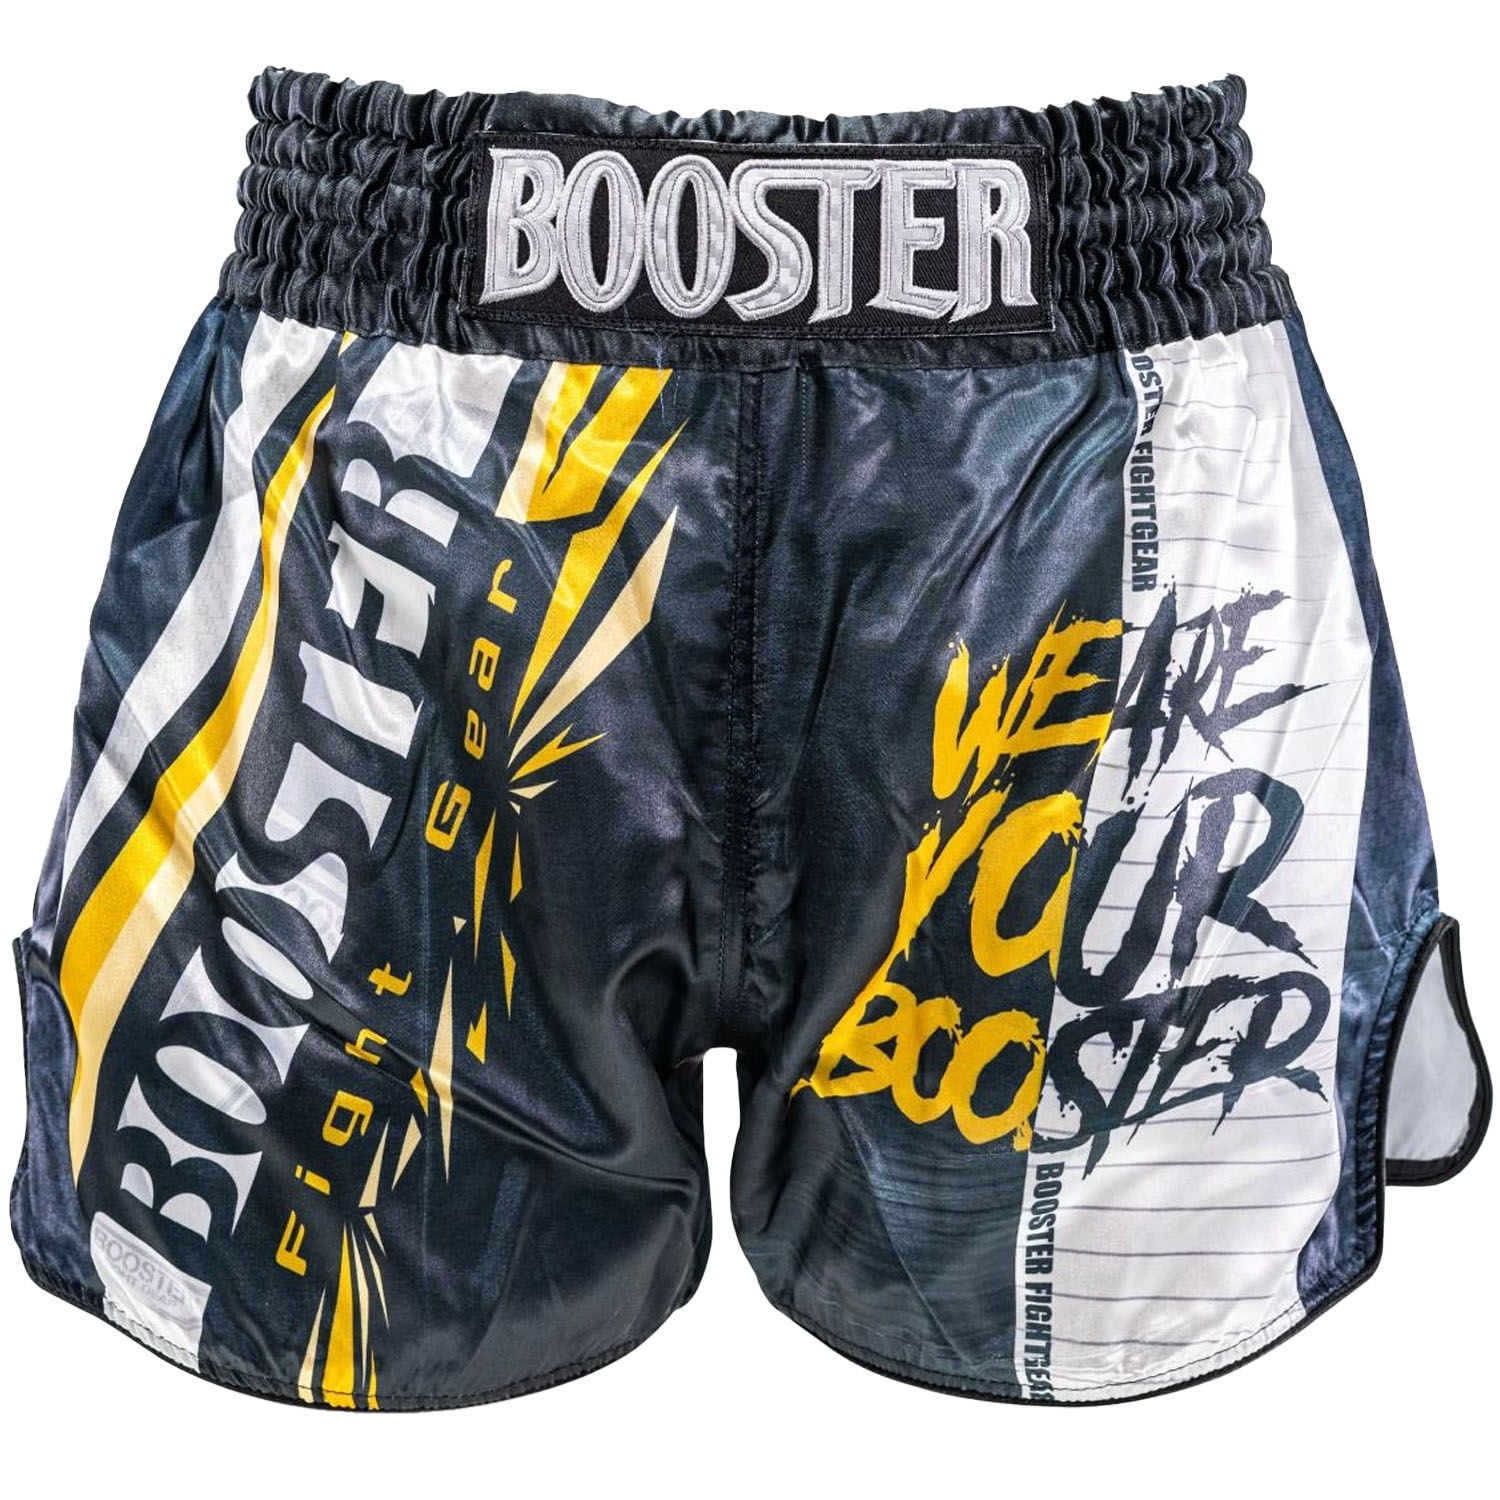 Booster Muay Thai Shorts, Performance 1, S